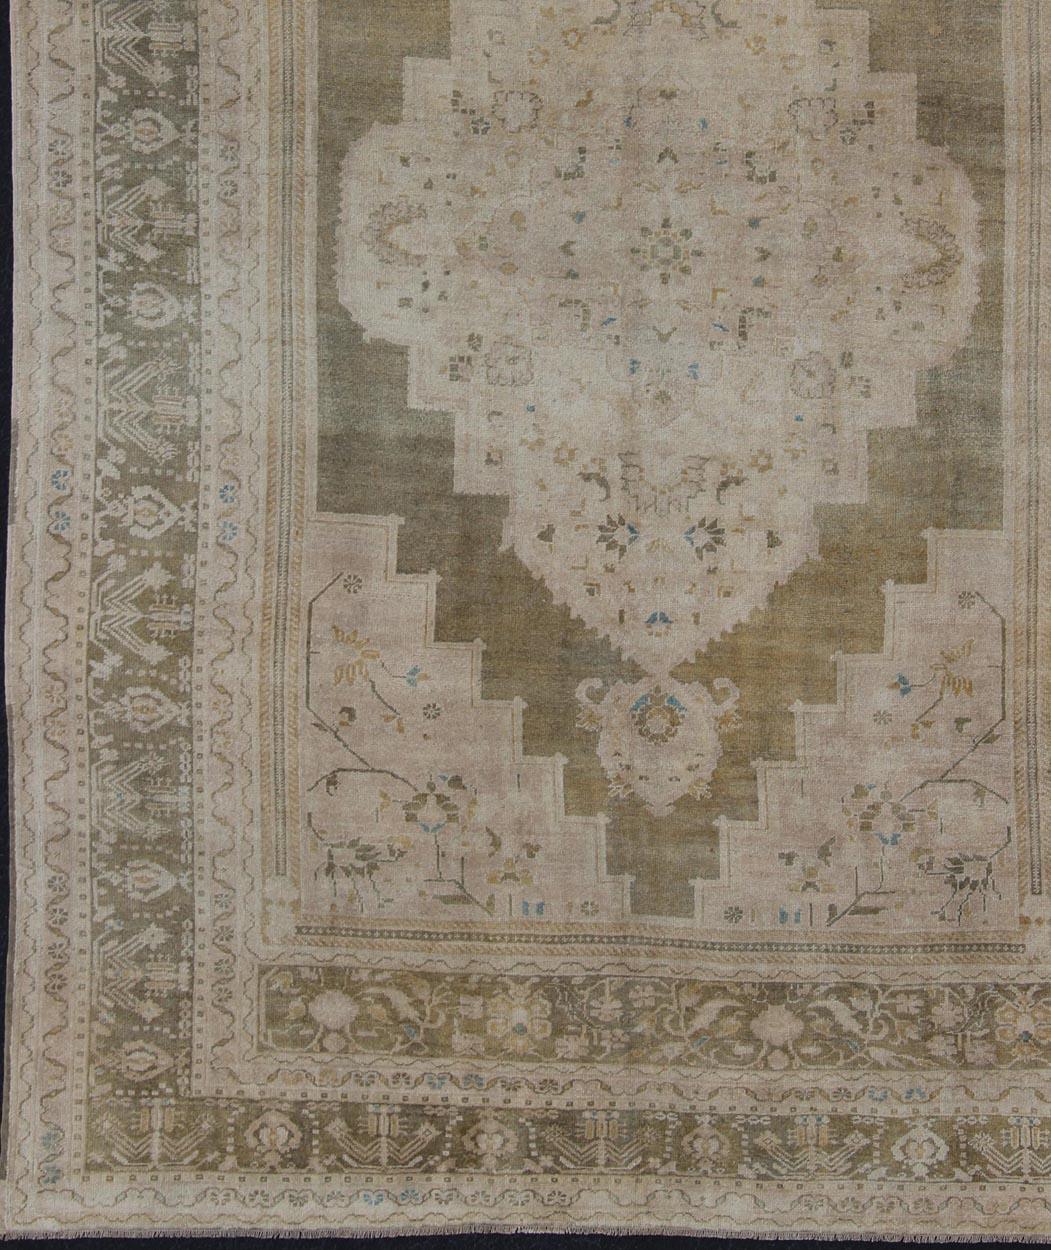  Beautiful and unique color Turkish Oushak vintage in Olive and Army green background and border, and  soft tones of tan. taupe, blush yellow and teal. rug en-179178, country of origin / type: Turkey / Oushak, circa 1940

This Oushak rug from Turkey